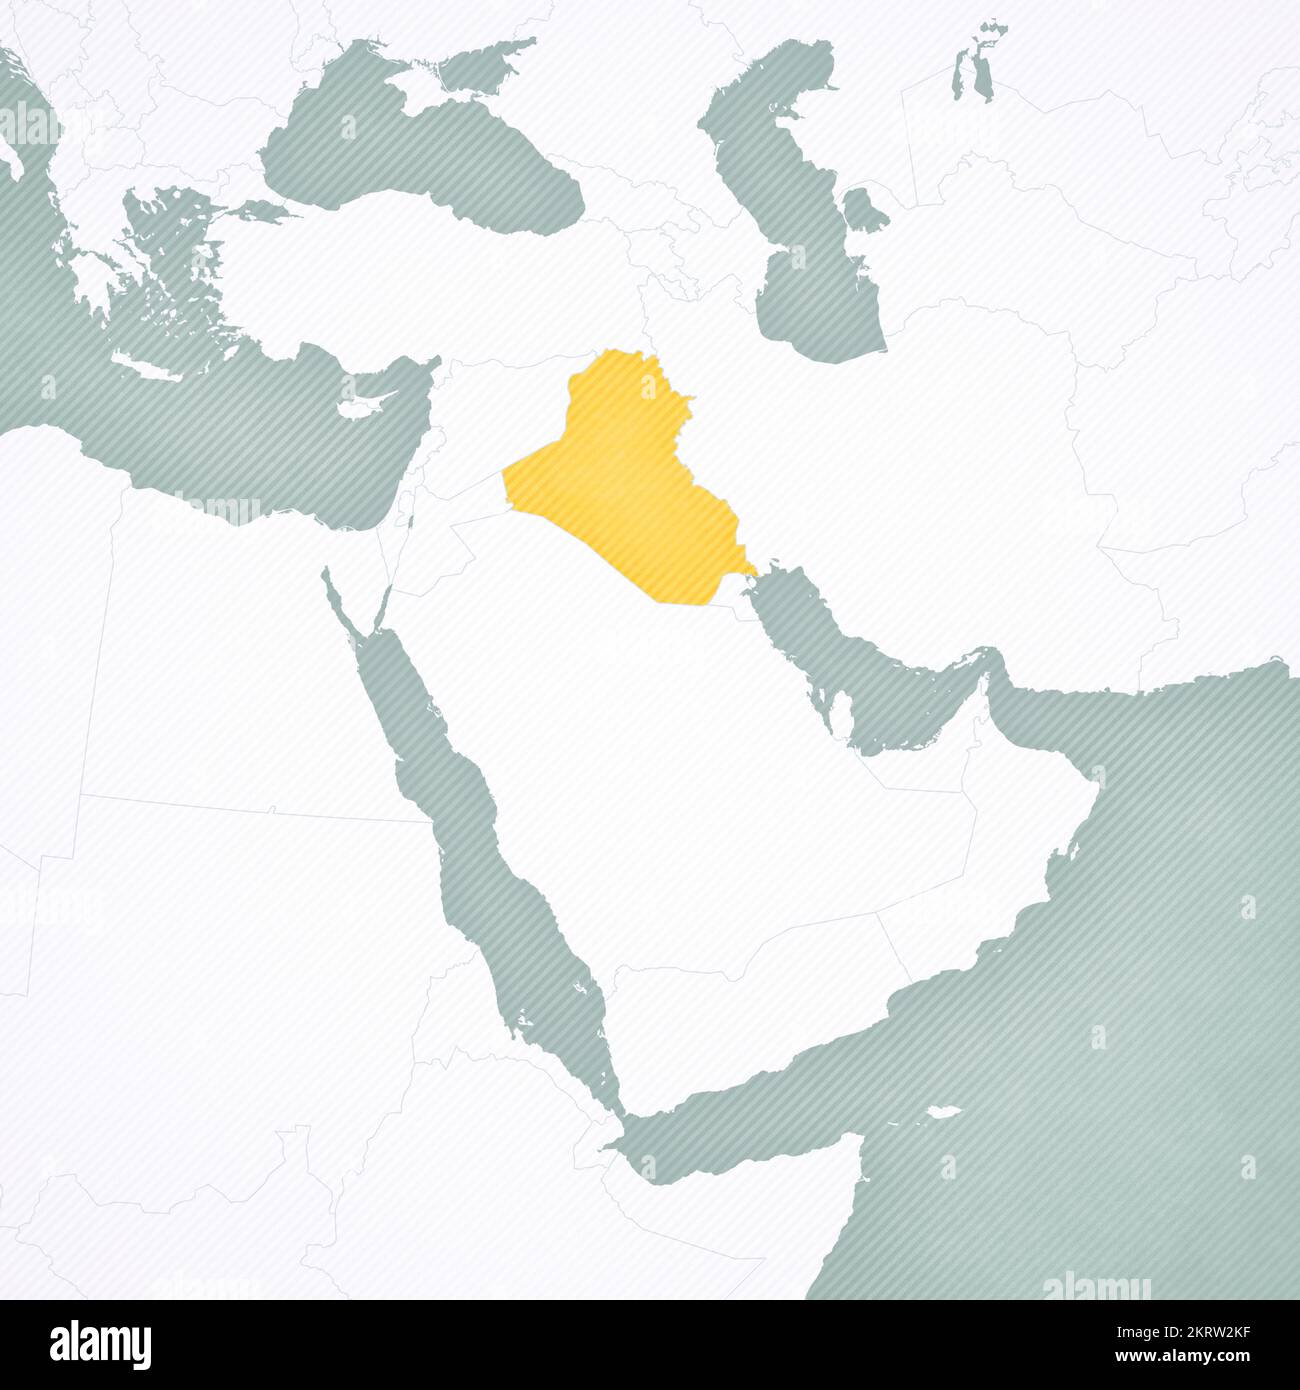 Iraq on the map of Middle East (Western Asia) with softly striped vintage background. Stock Photo